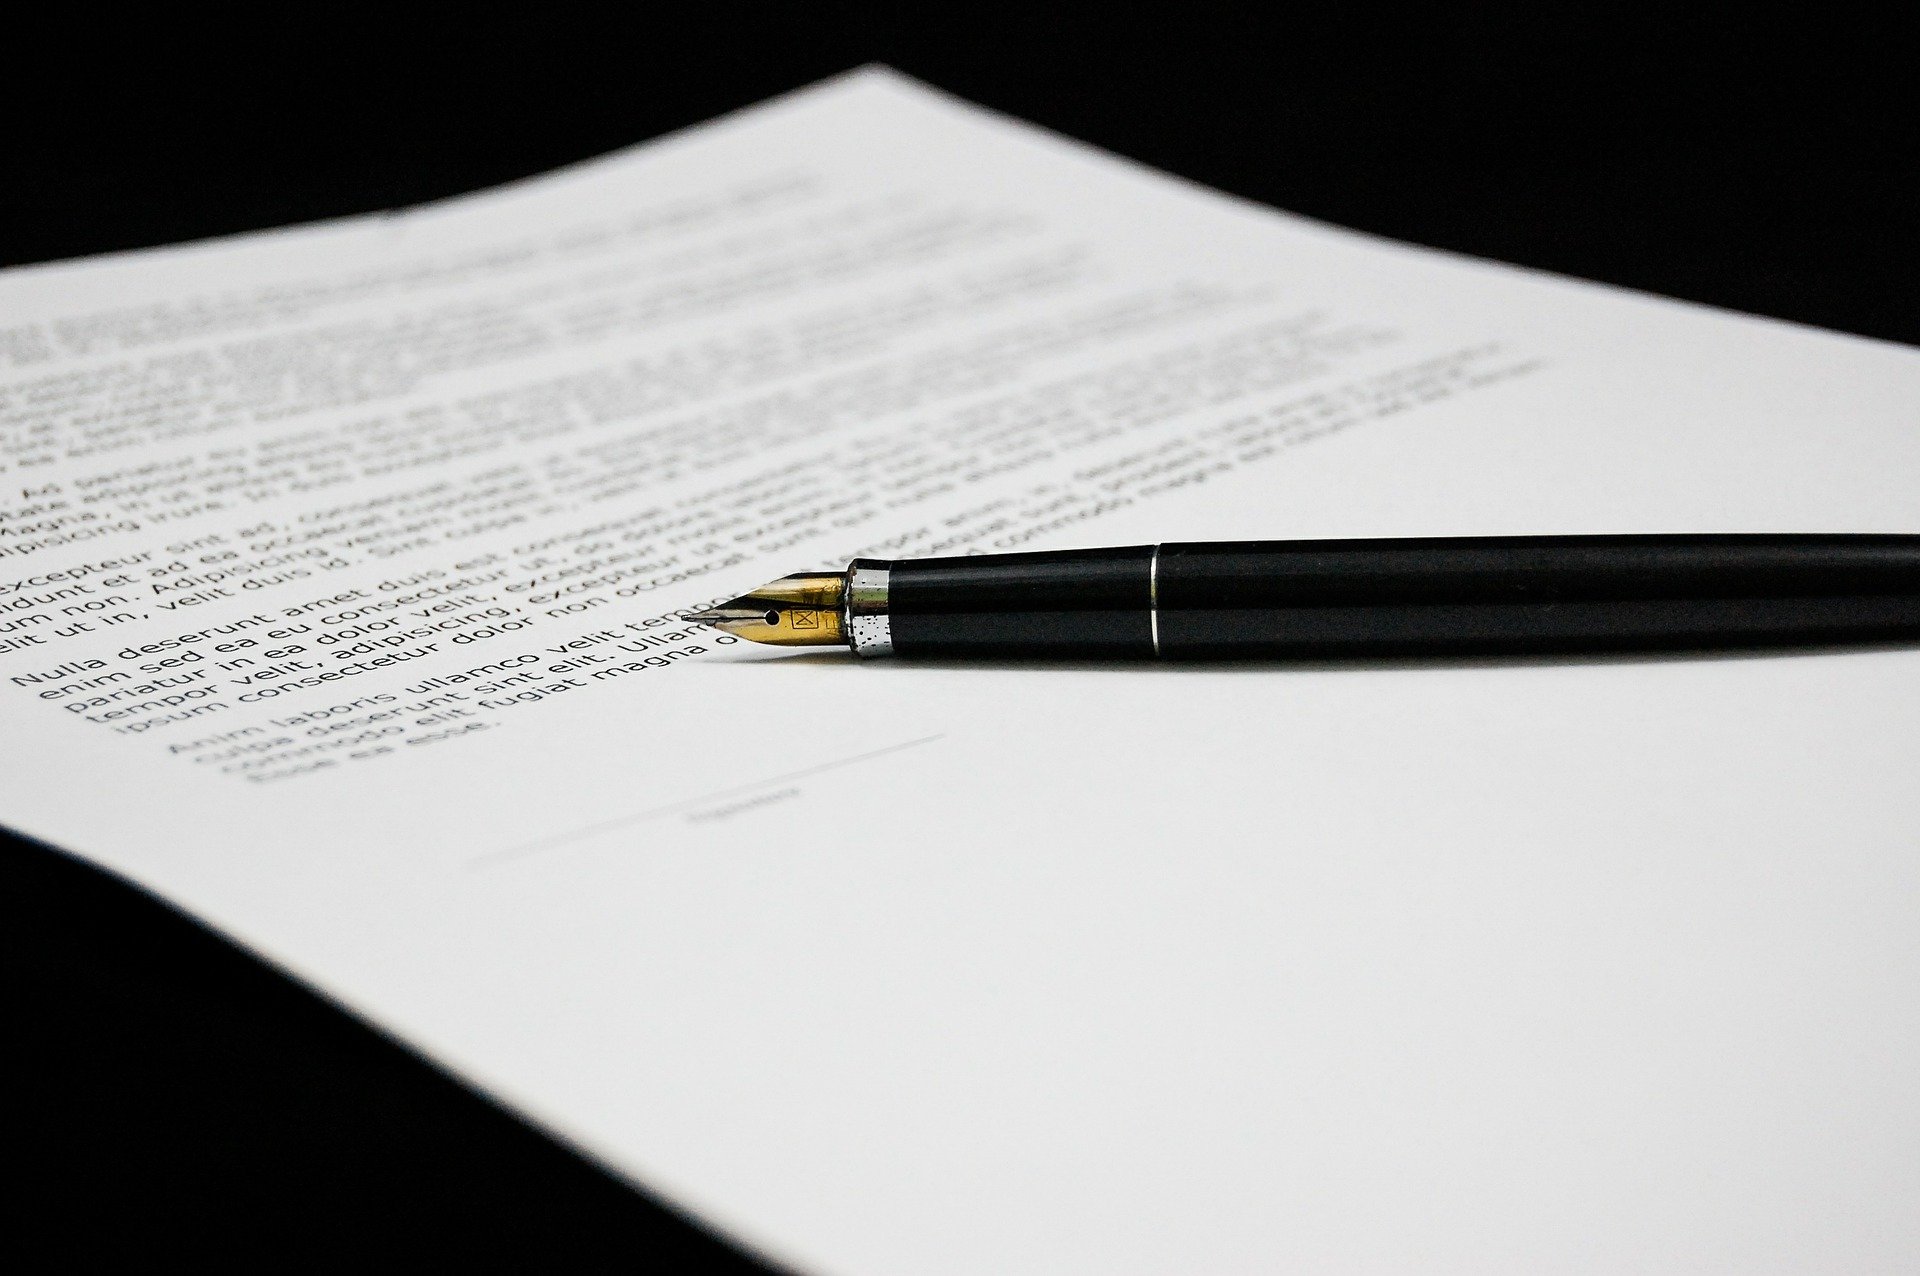 Termination of employment contracts by giving notice